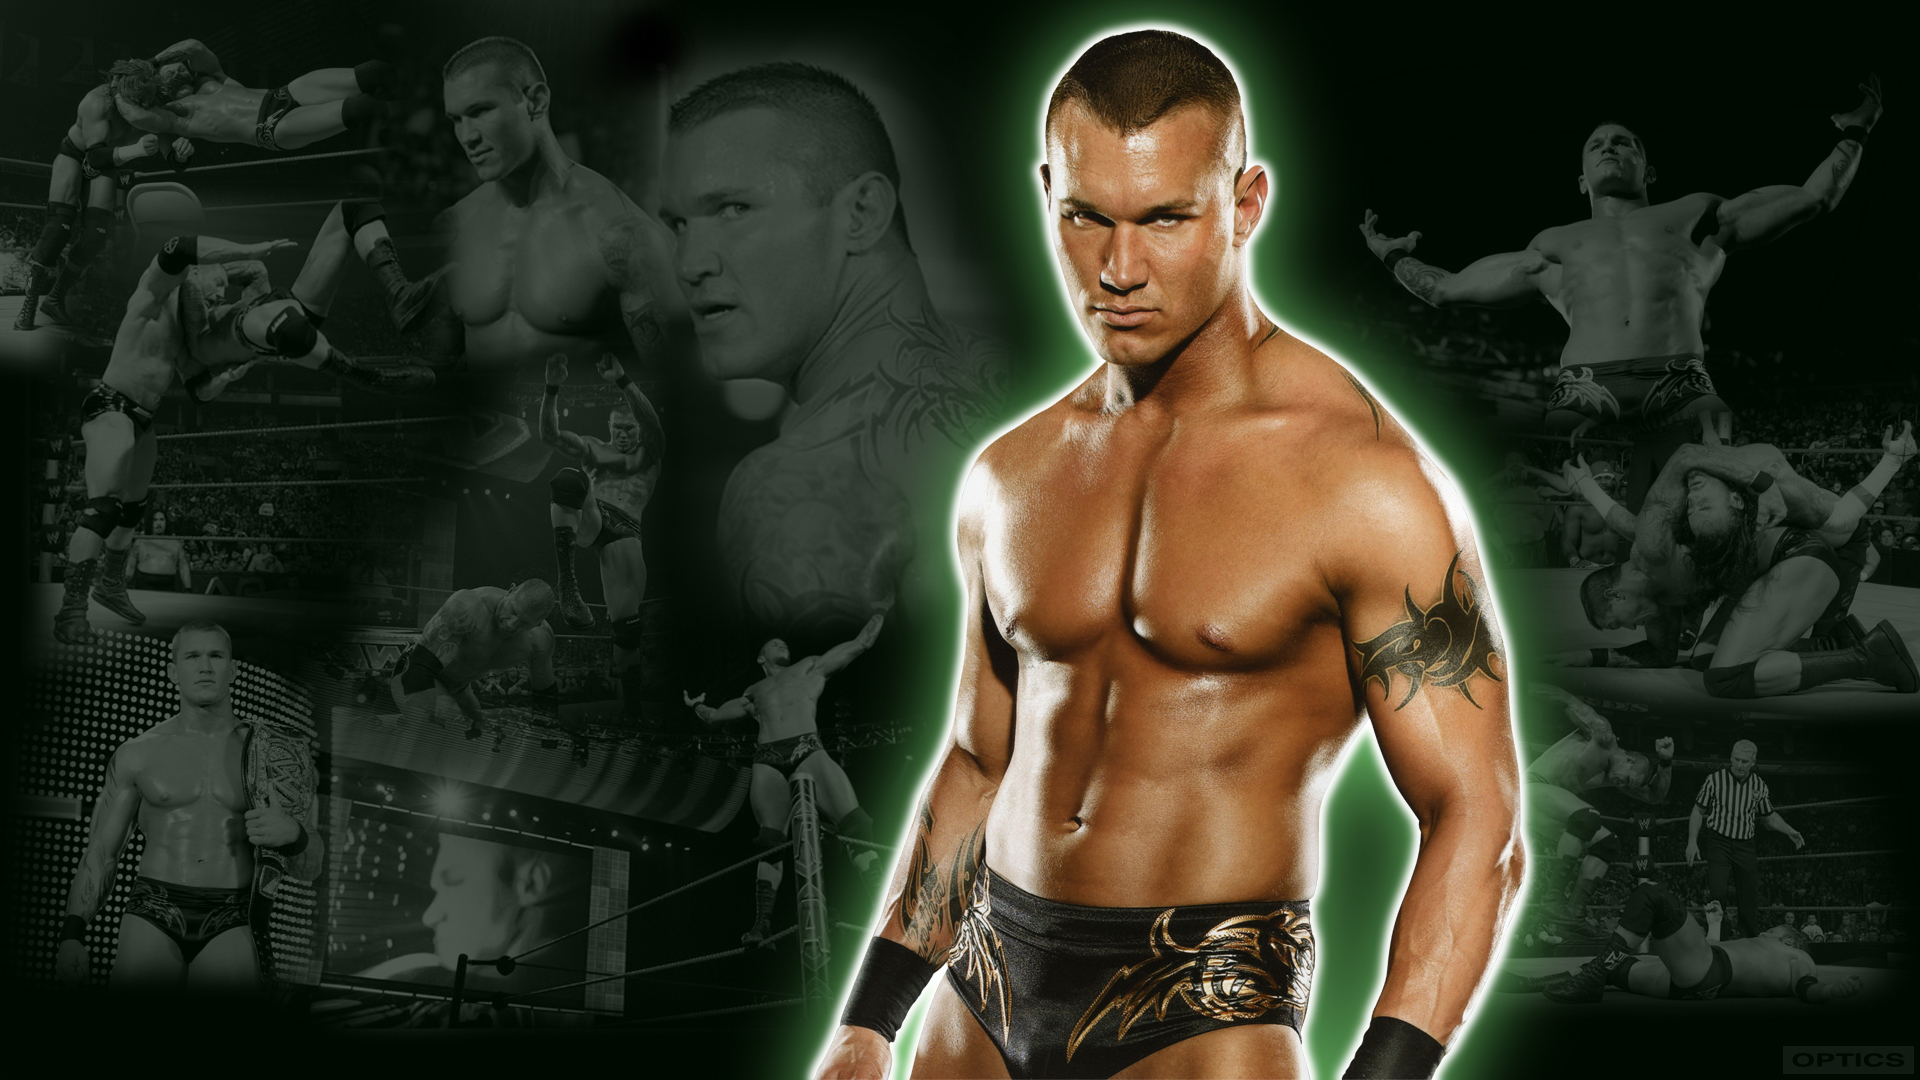 Image Gallery Wwe Fighters